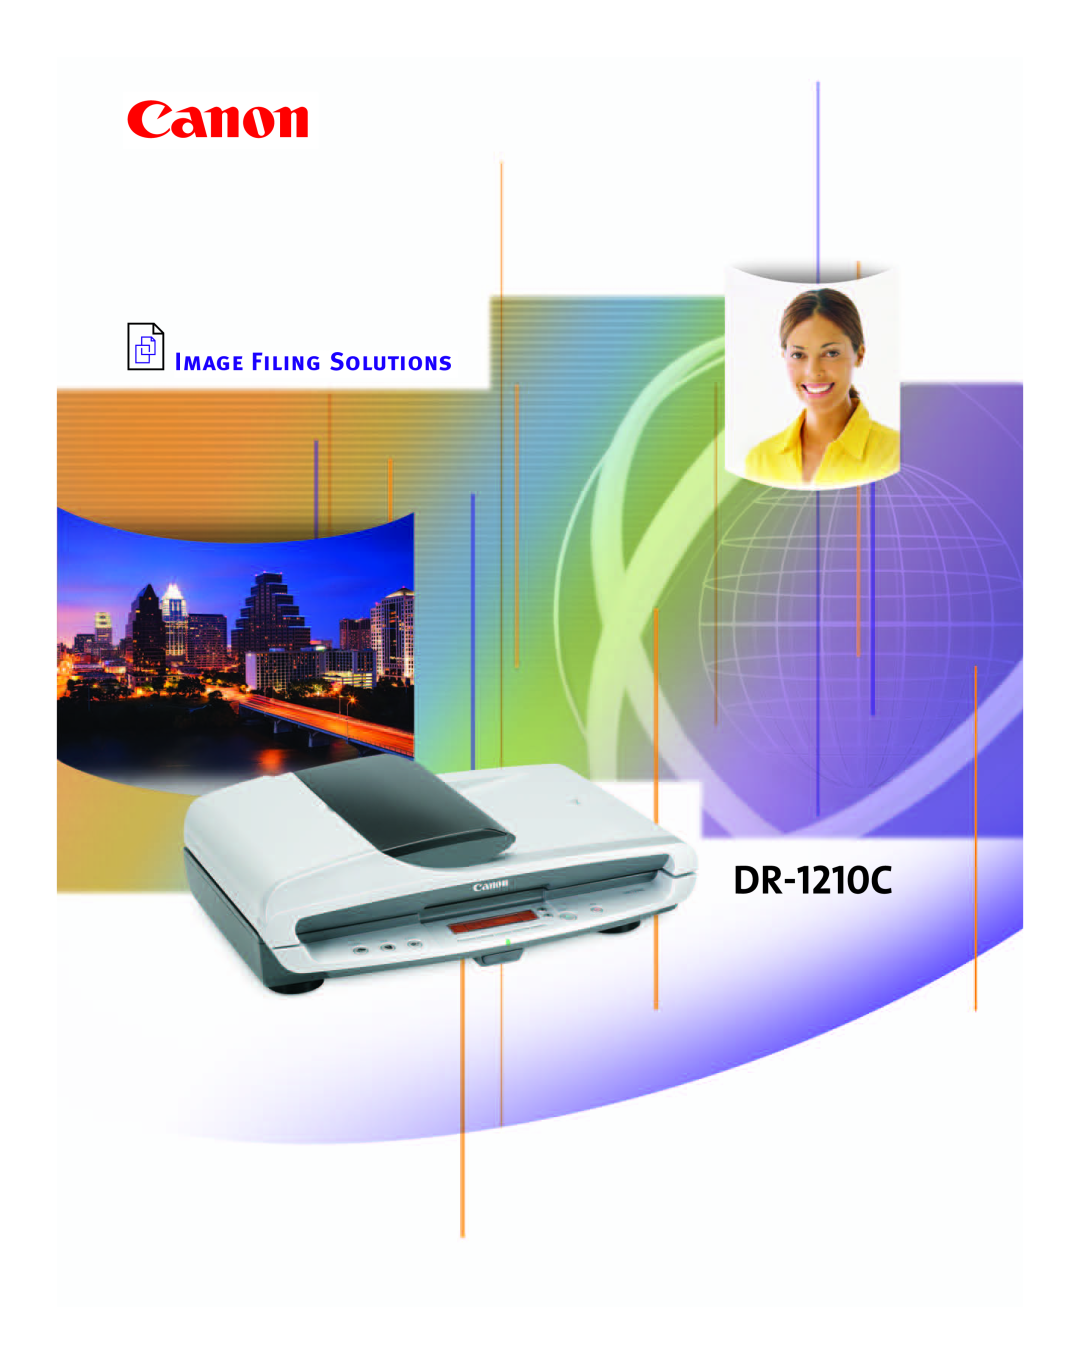 Cannon DR-1210C manual Image Filing Solutions 